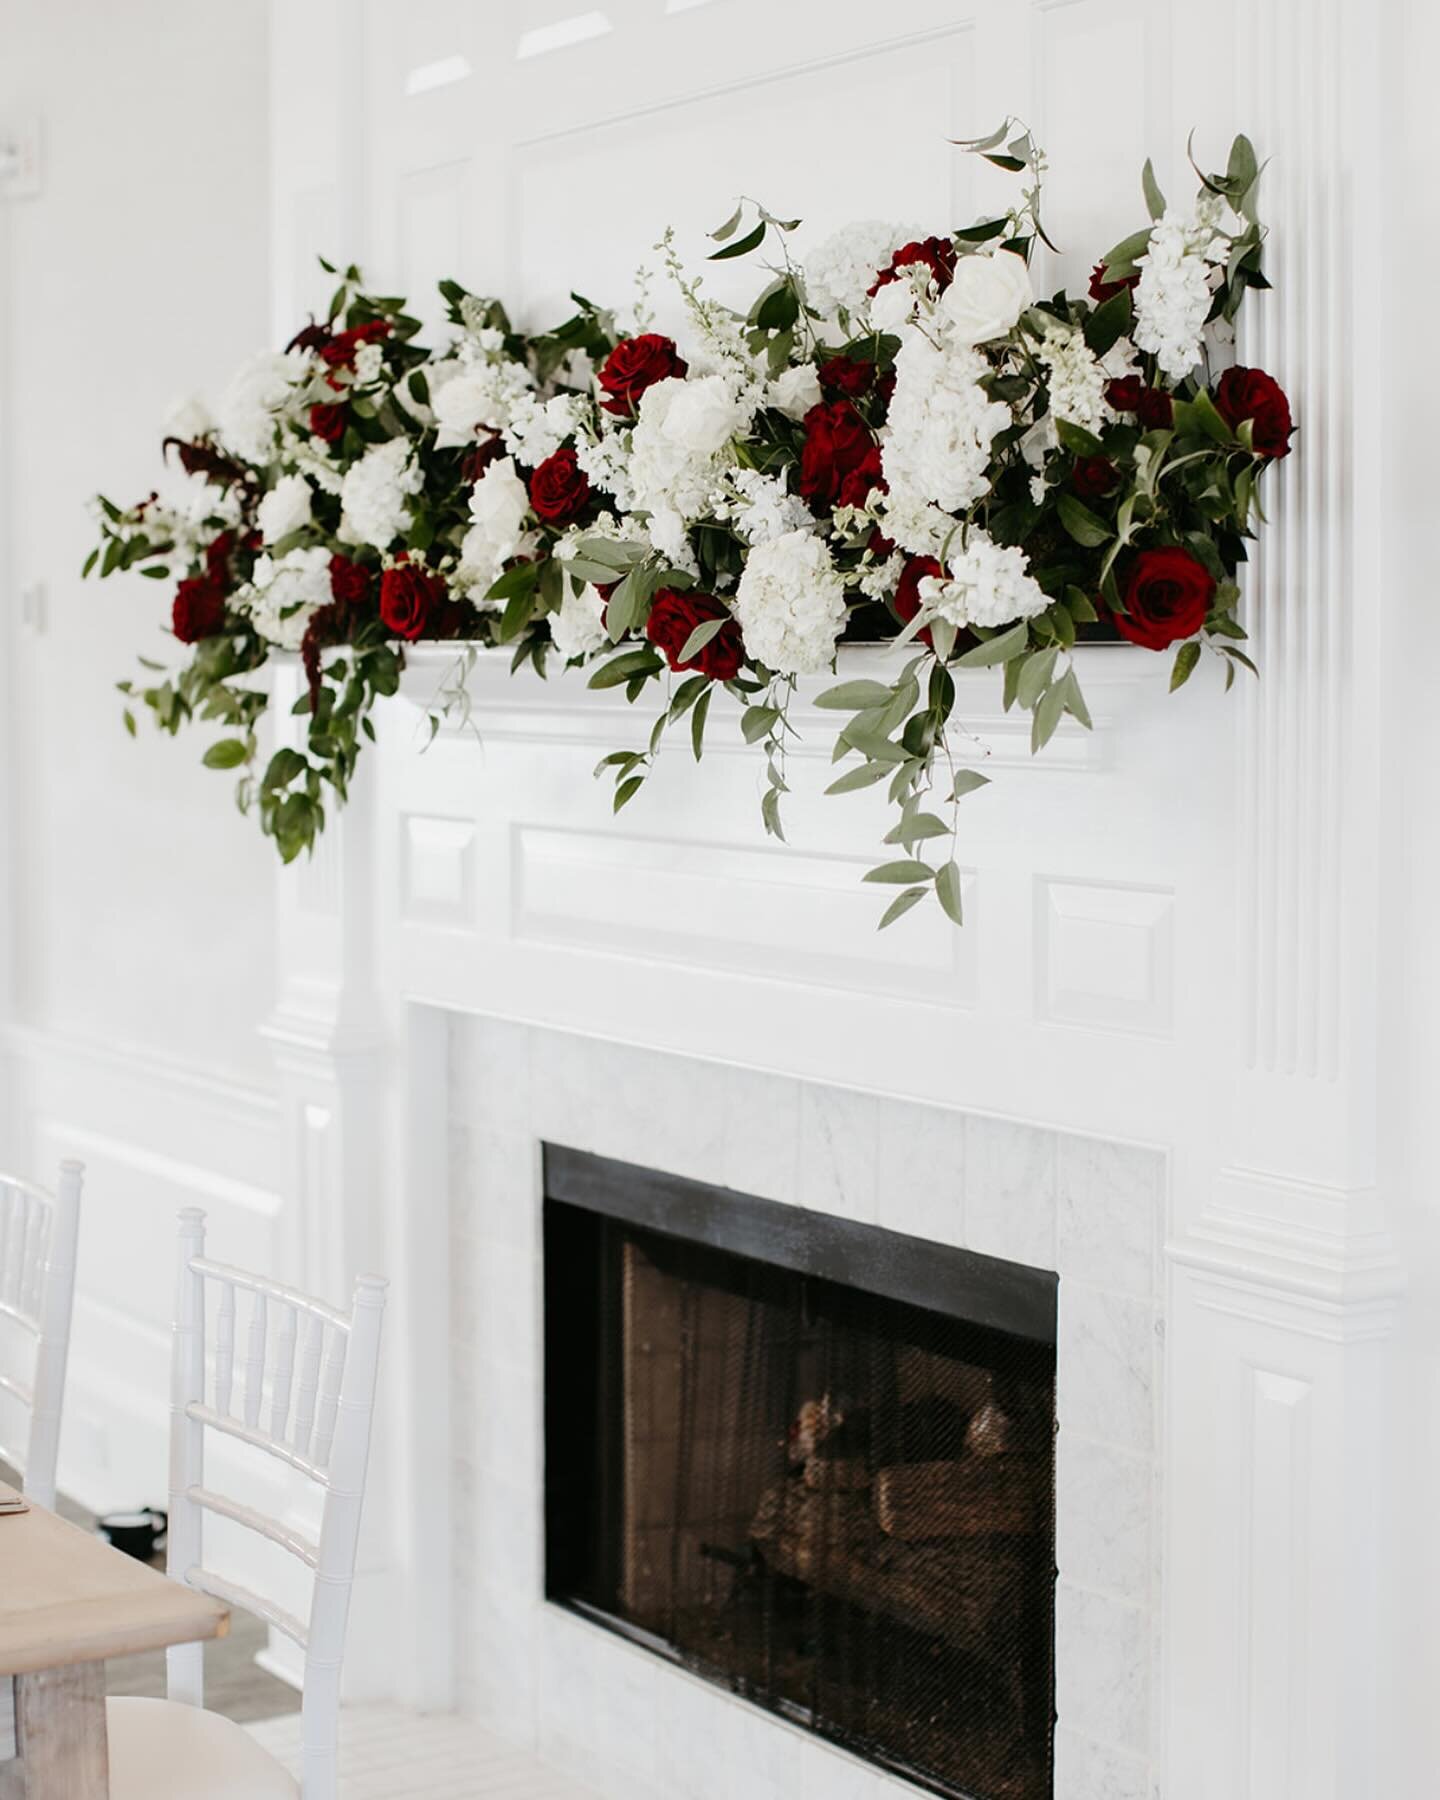 I love designing floral arrangements for mantles, it makes such a statement each and every time. 

This mantle piece was mostly white to match the neutral aesthetic of the reception space with pops of red to complement our Bride and Grooms wedding co